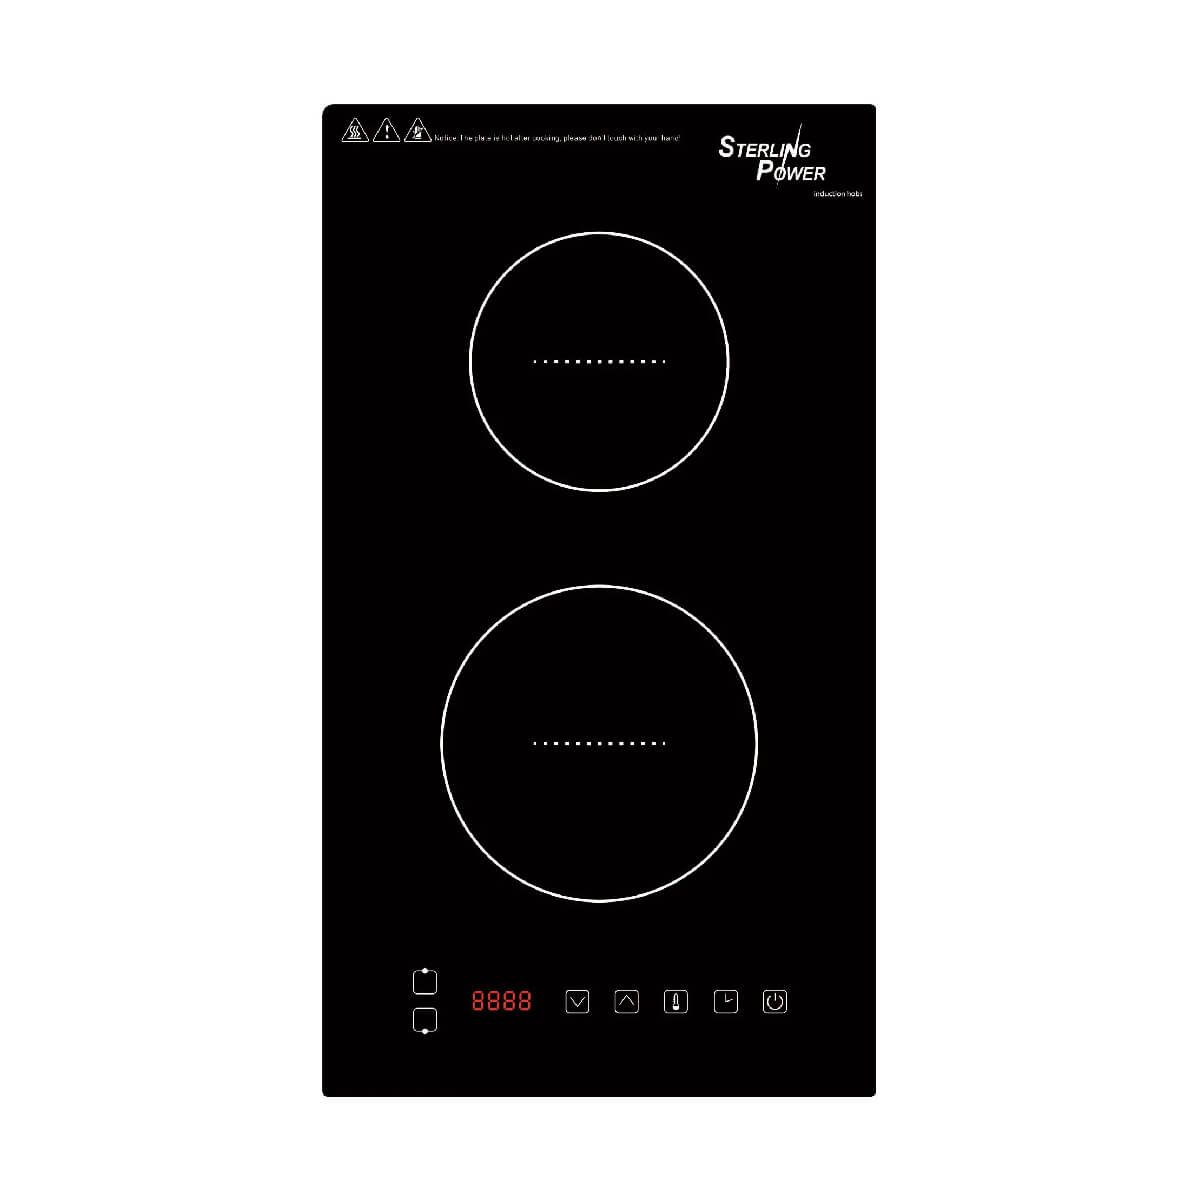 Sterling Power Induction Hob‚ Fixed‚ Front-to-Back Twin Rings features a sleek black glass-top with two circular burners and a digital control panel.